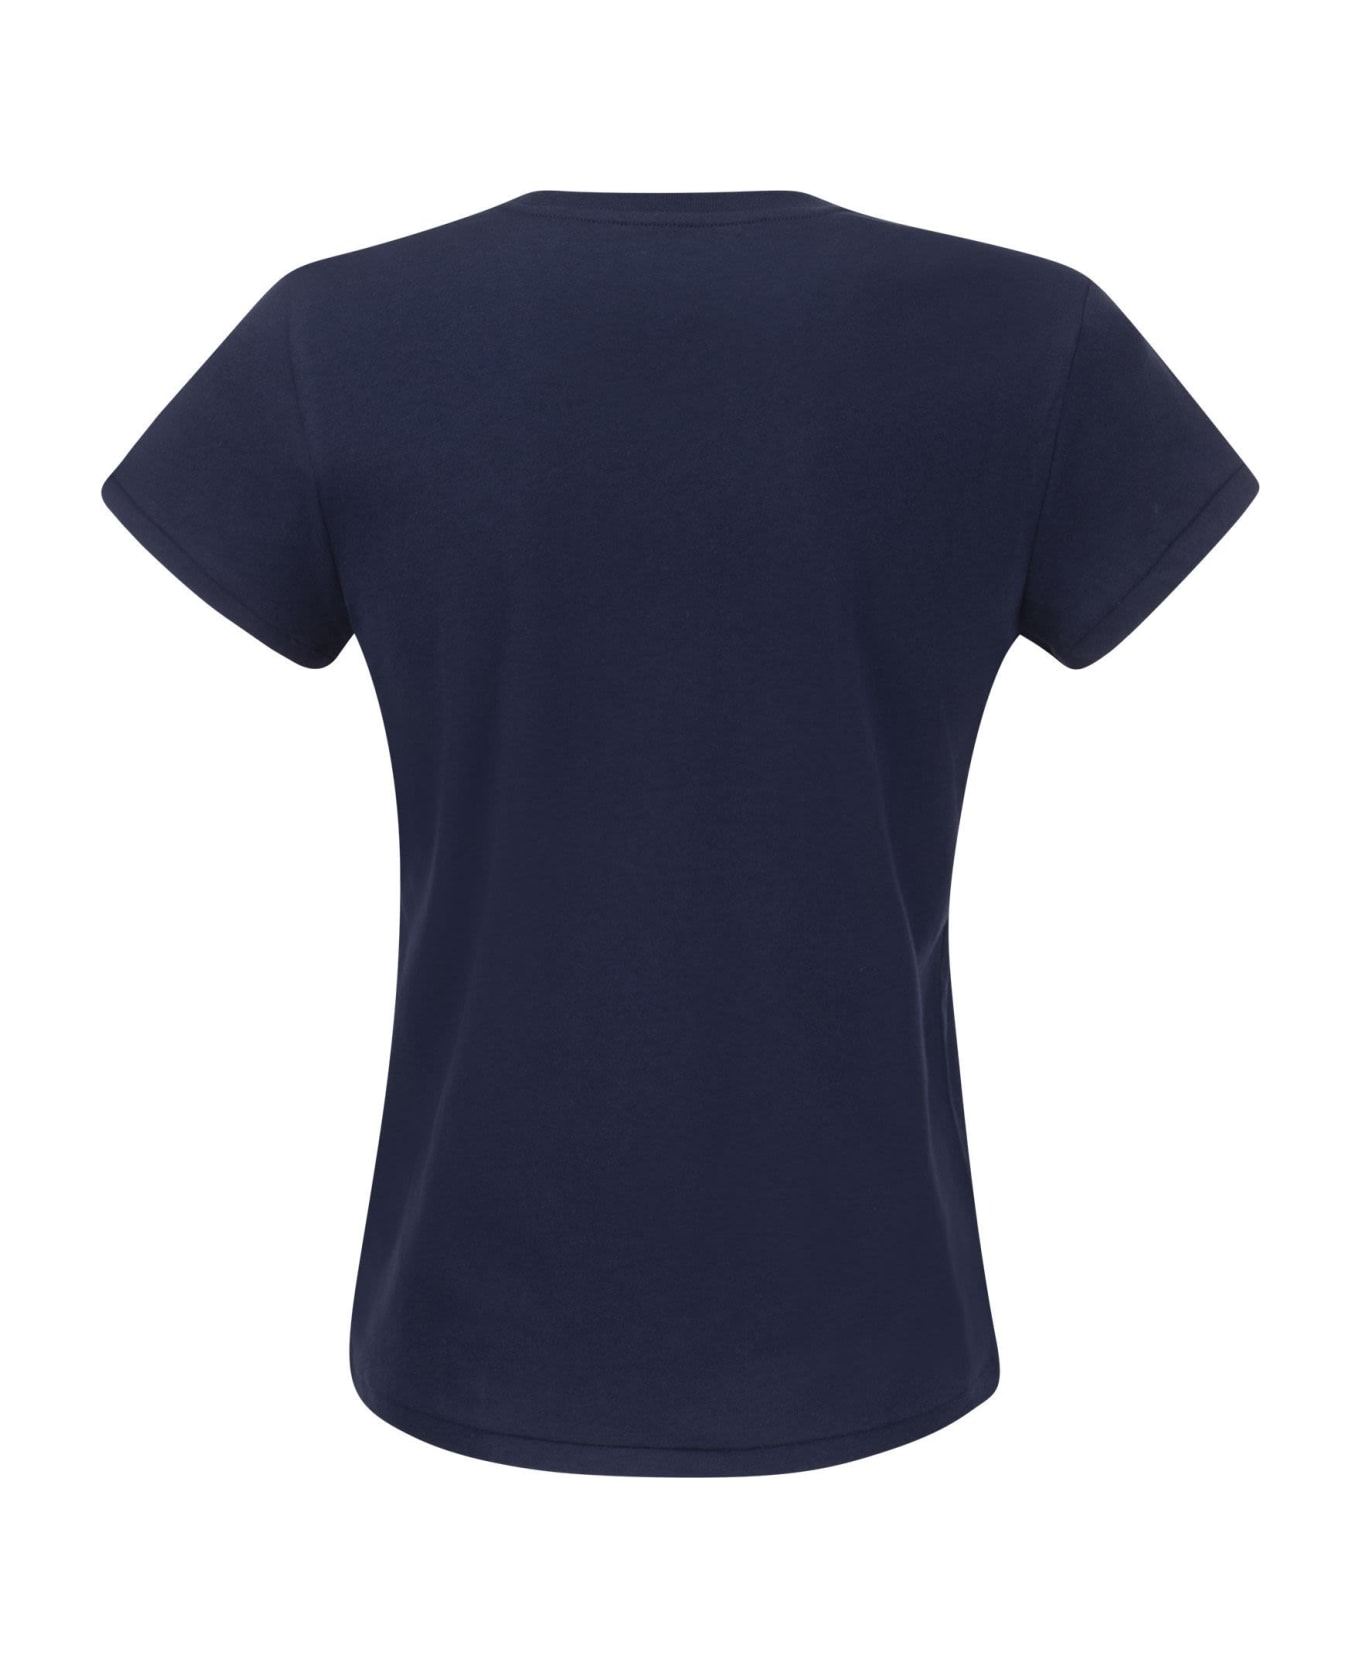 Polo Ralph Lauren Blue T-shirt With Contrasting Pony - Blue Tシャツ